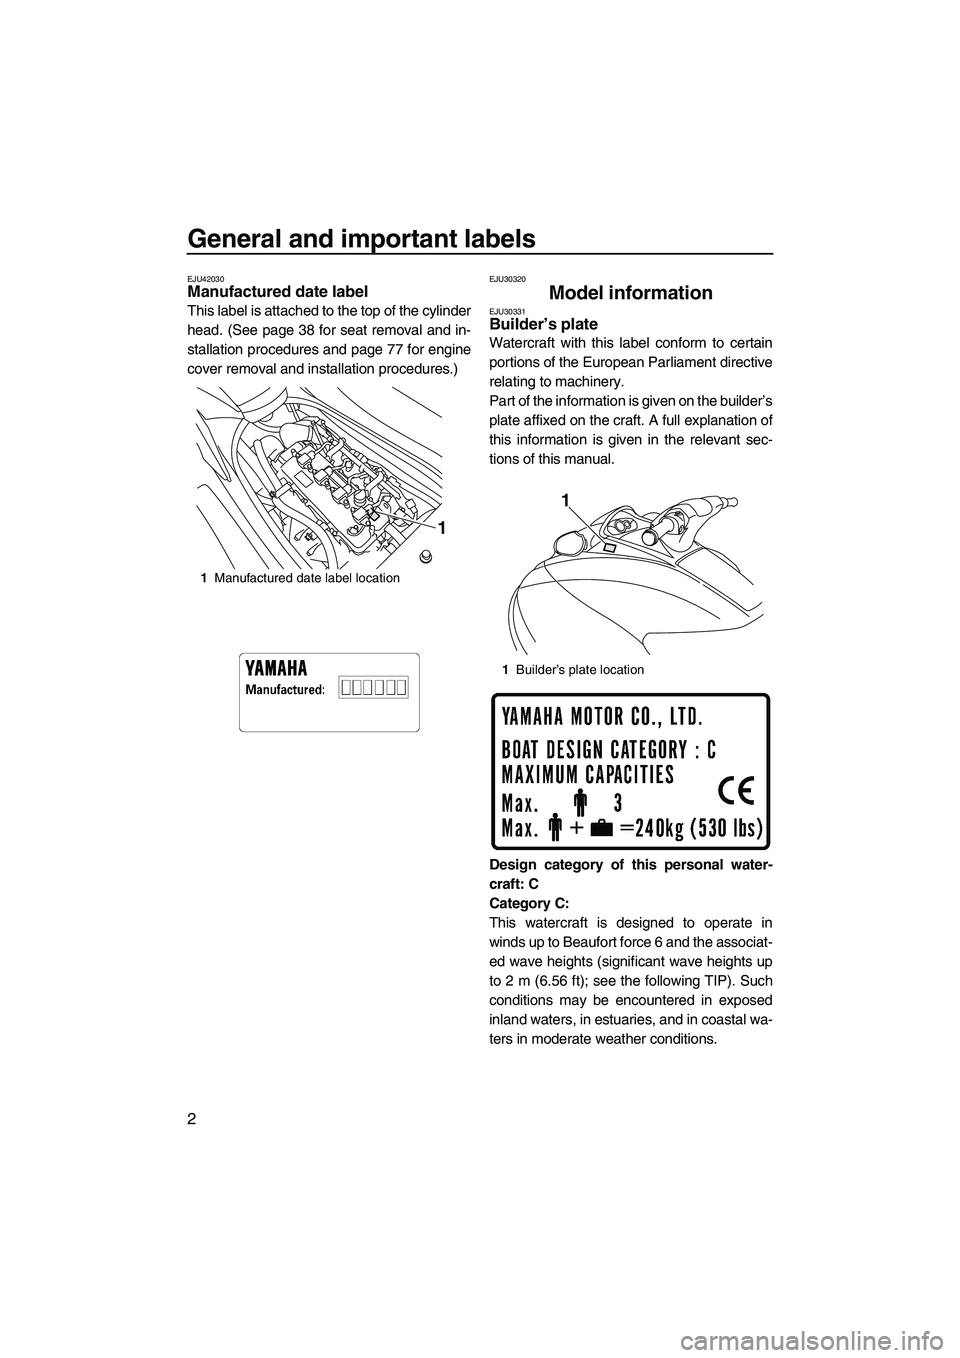 YAMAHA VXR 2013  Owners Manual General and important labels
2
EJU42030Manufactured date label 
This label is attached to the top of the cylinder
head. (See page 38 for seat removal and in-
stallation procedures and page 77 for engi